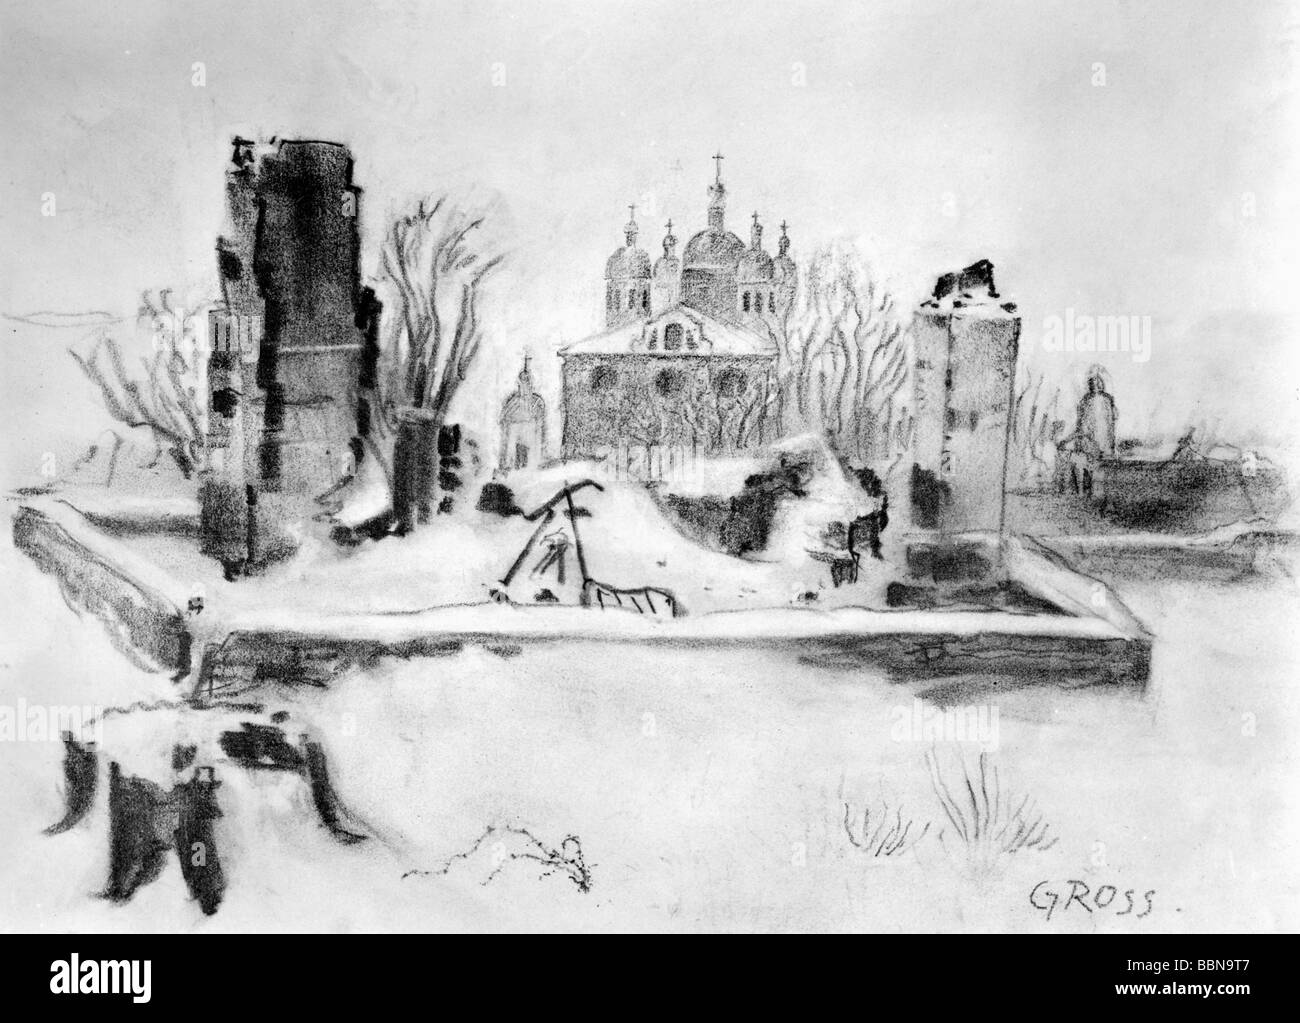 events, Second World War / WWII, Russia, cities / villages / landscapes, the cathedral of Smolensk behind a ruin, drawing by Gross, December 1941 / January 1942 USSR, Eastern Front, Soviet Union, 20th century, historic, historical, destruction, ruin, ruins, church, churches, campaign, Baroque, Uspensky, 1940s, Stock Photo